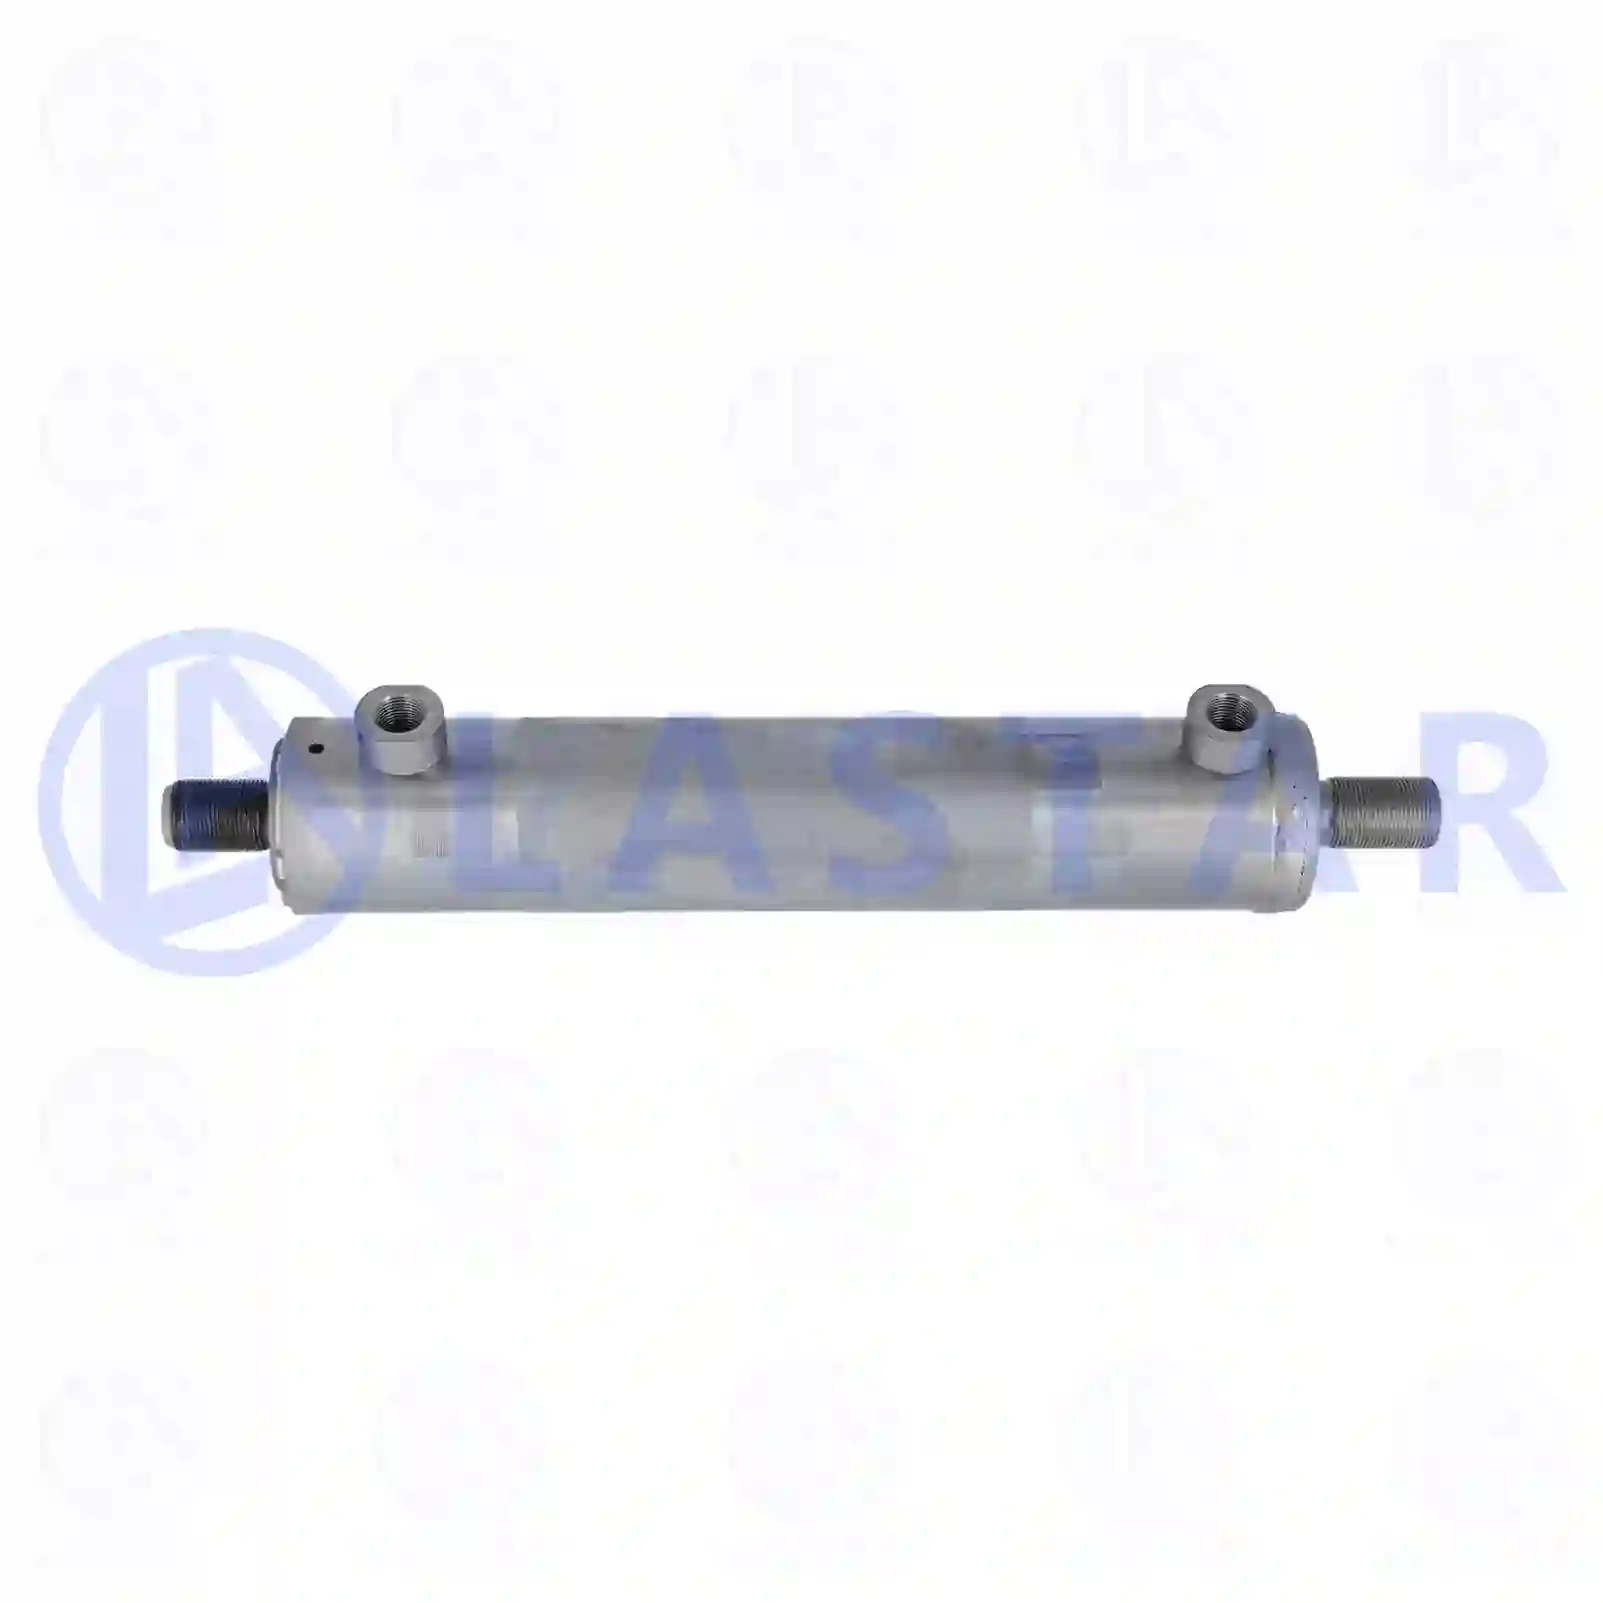  Steering cylinder || Lastar Spare Part | Truck Spare Parts, Auotomotive Spare Parts